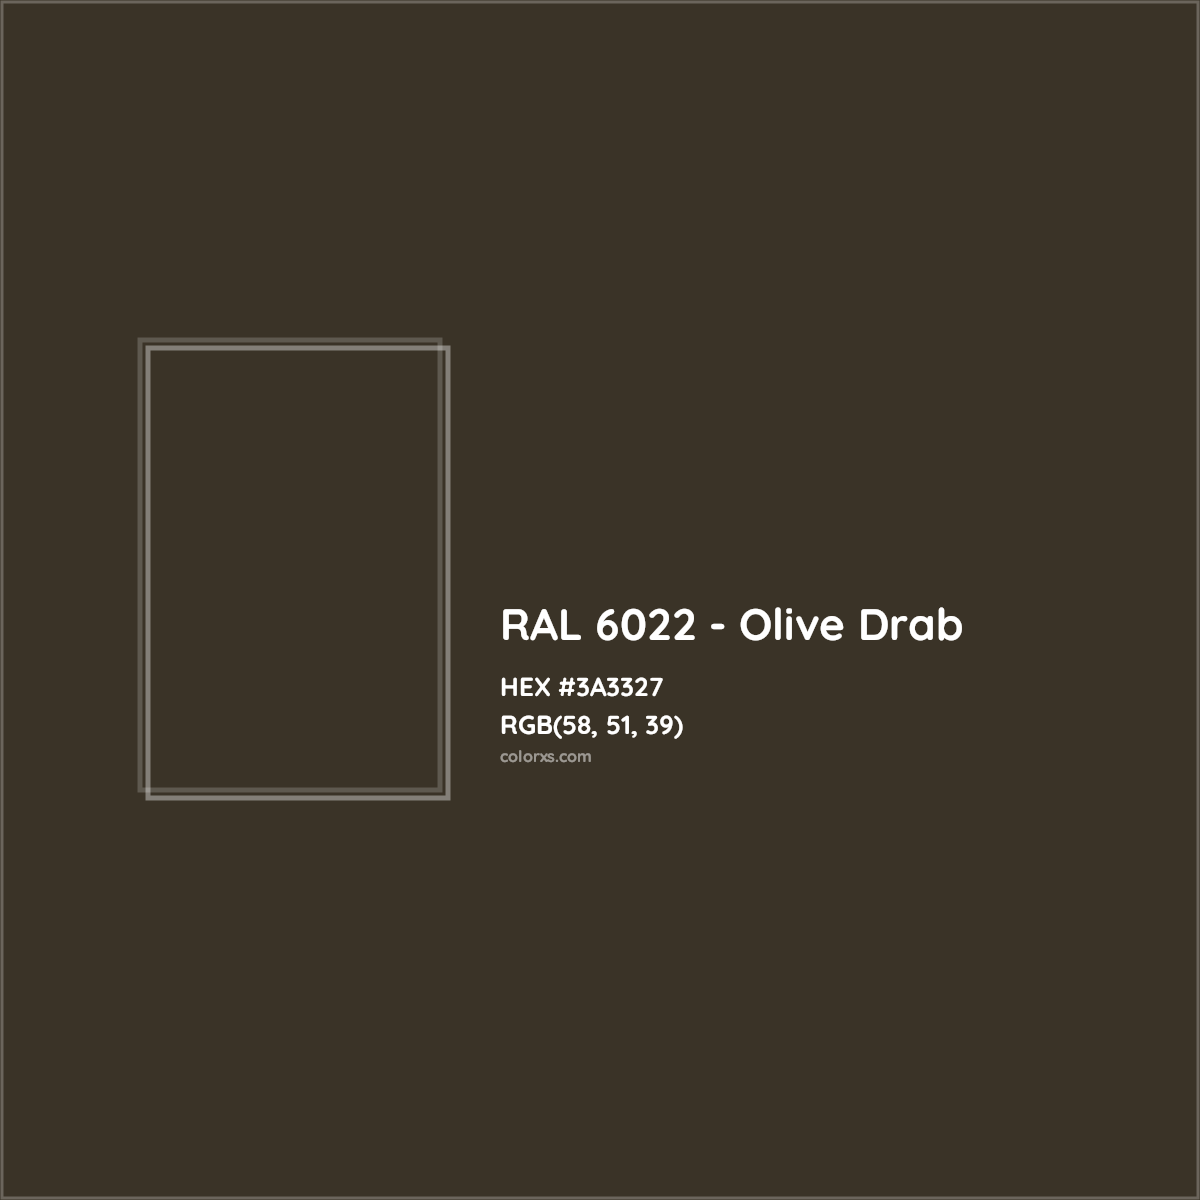 HEX #3A3327 RAL 6022 - Olive Drab CMS RAL Classic - Color Code